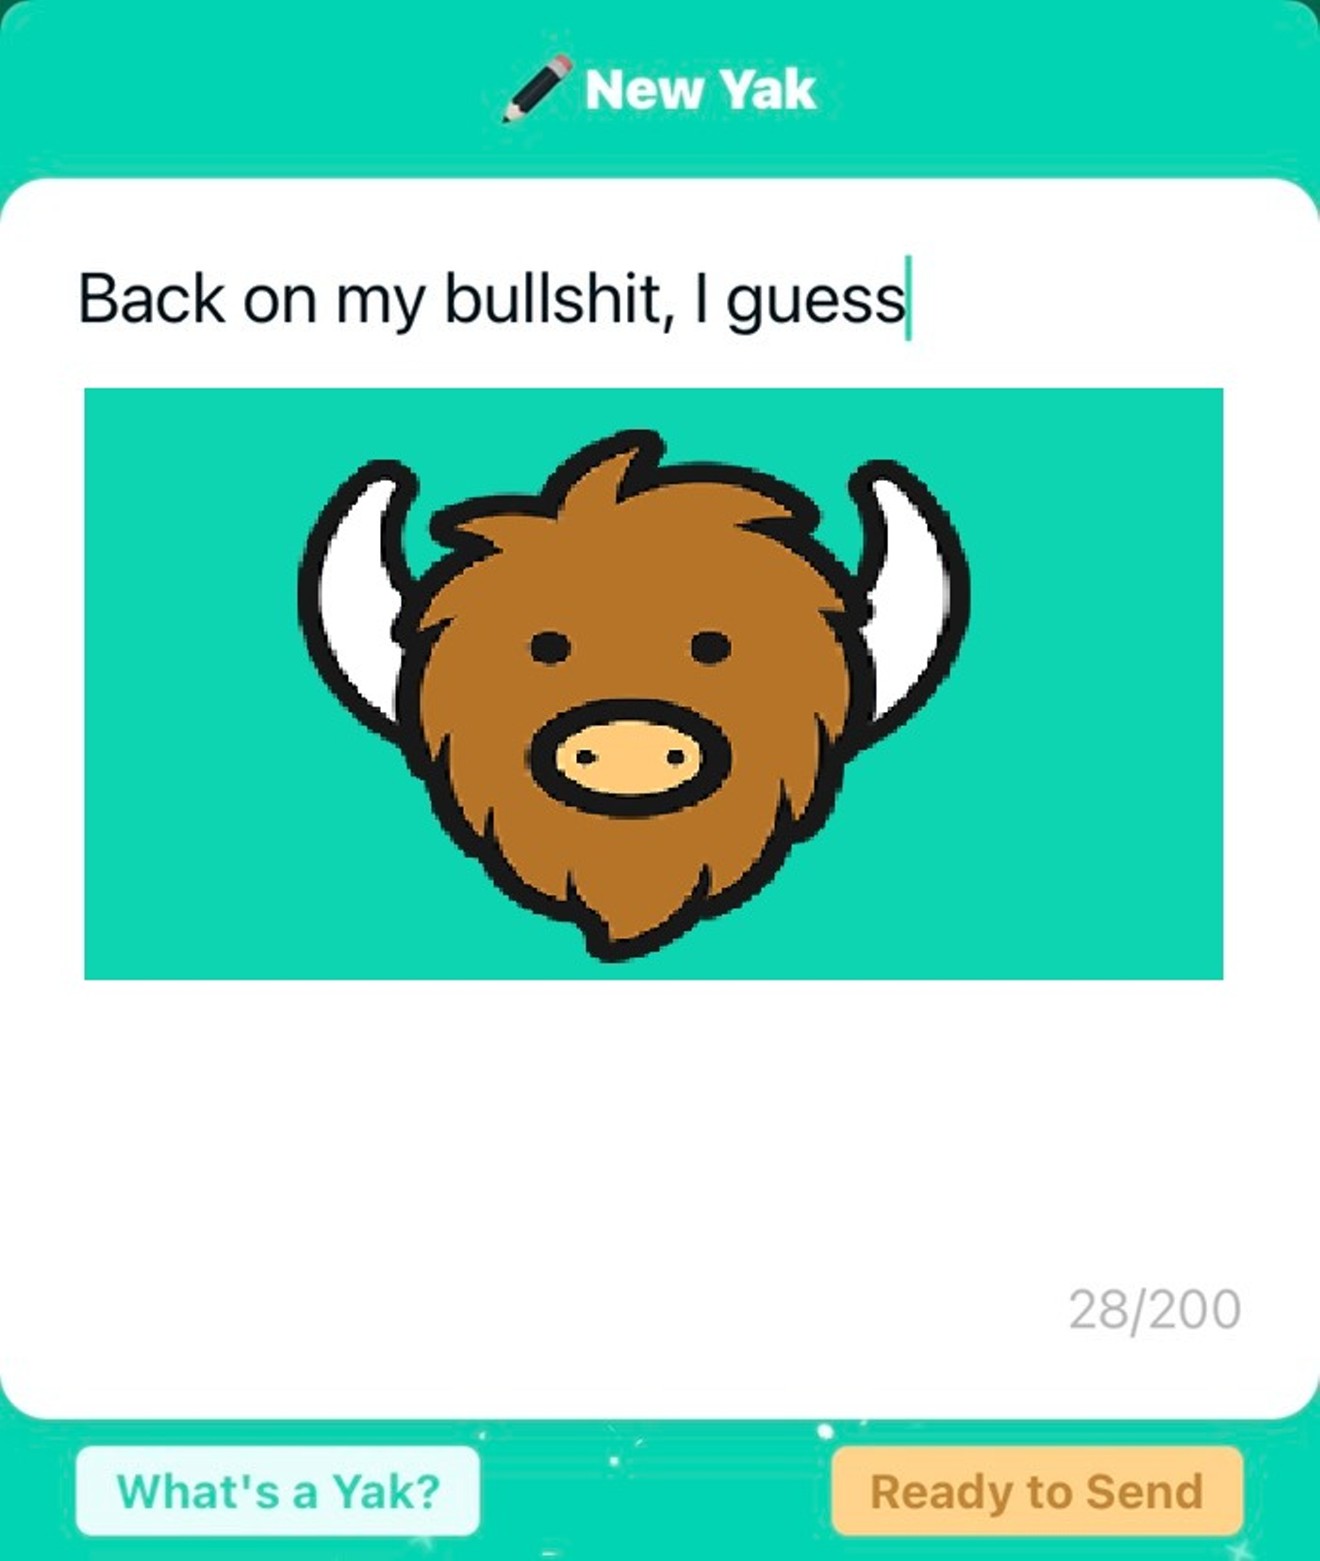 Yik Yak relaunched in August.